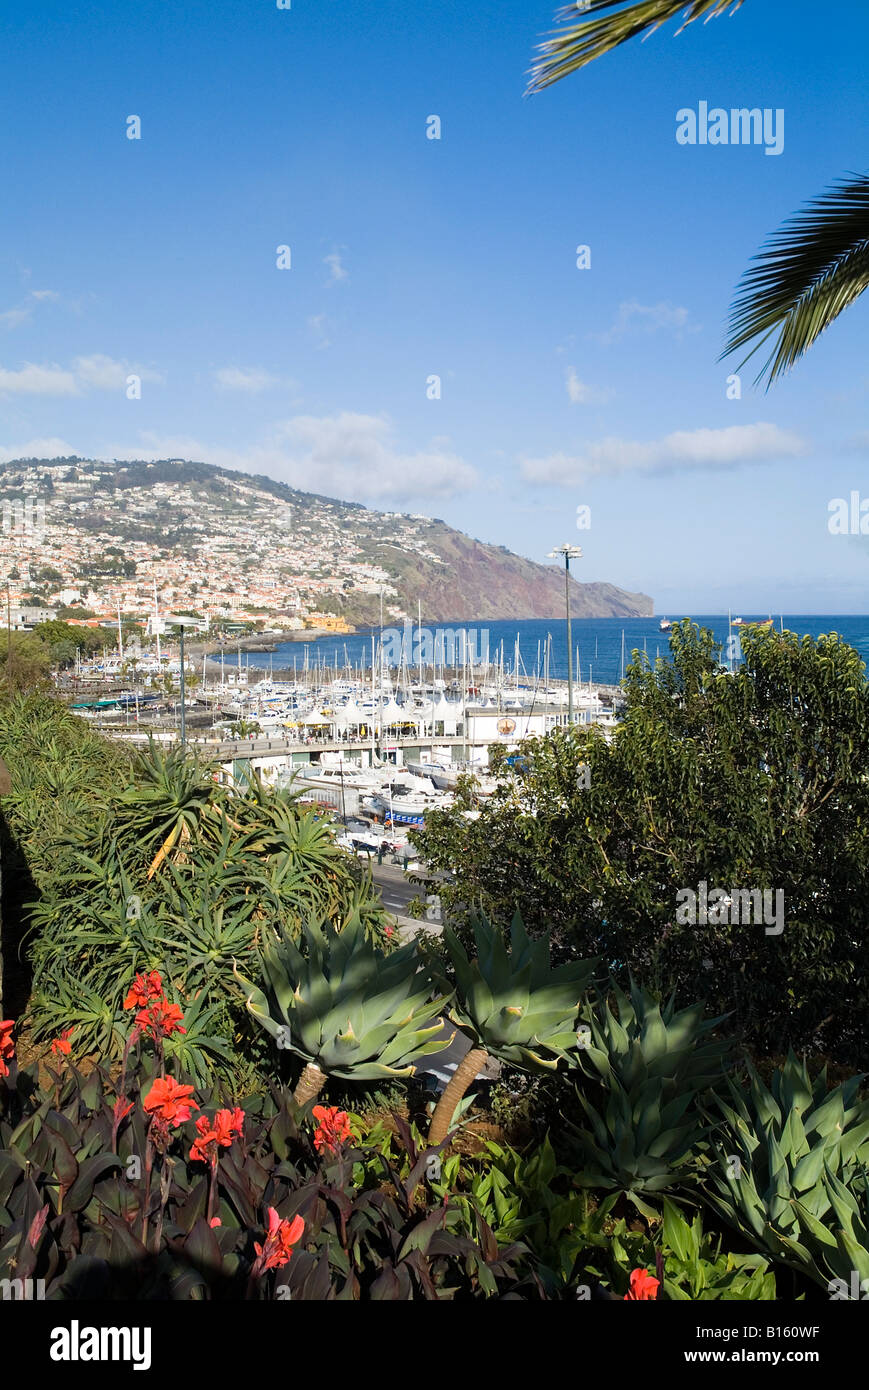 dh Funchal harbour FUNCHAL MADEIRA View of Funchal marina from Parque de Santa Catarina gardens springflowers viewing point Stock Photo